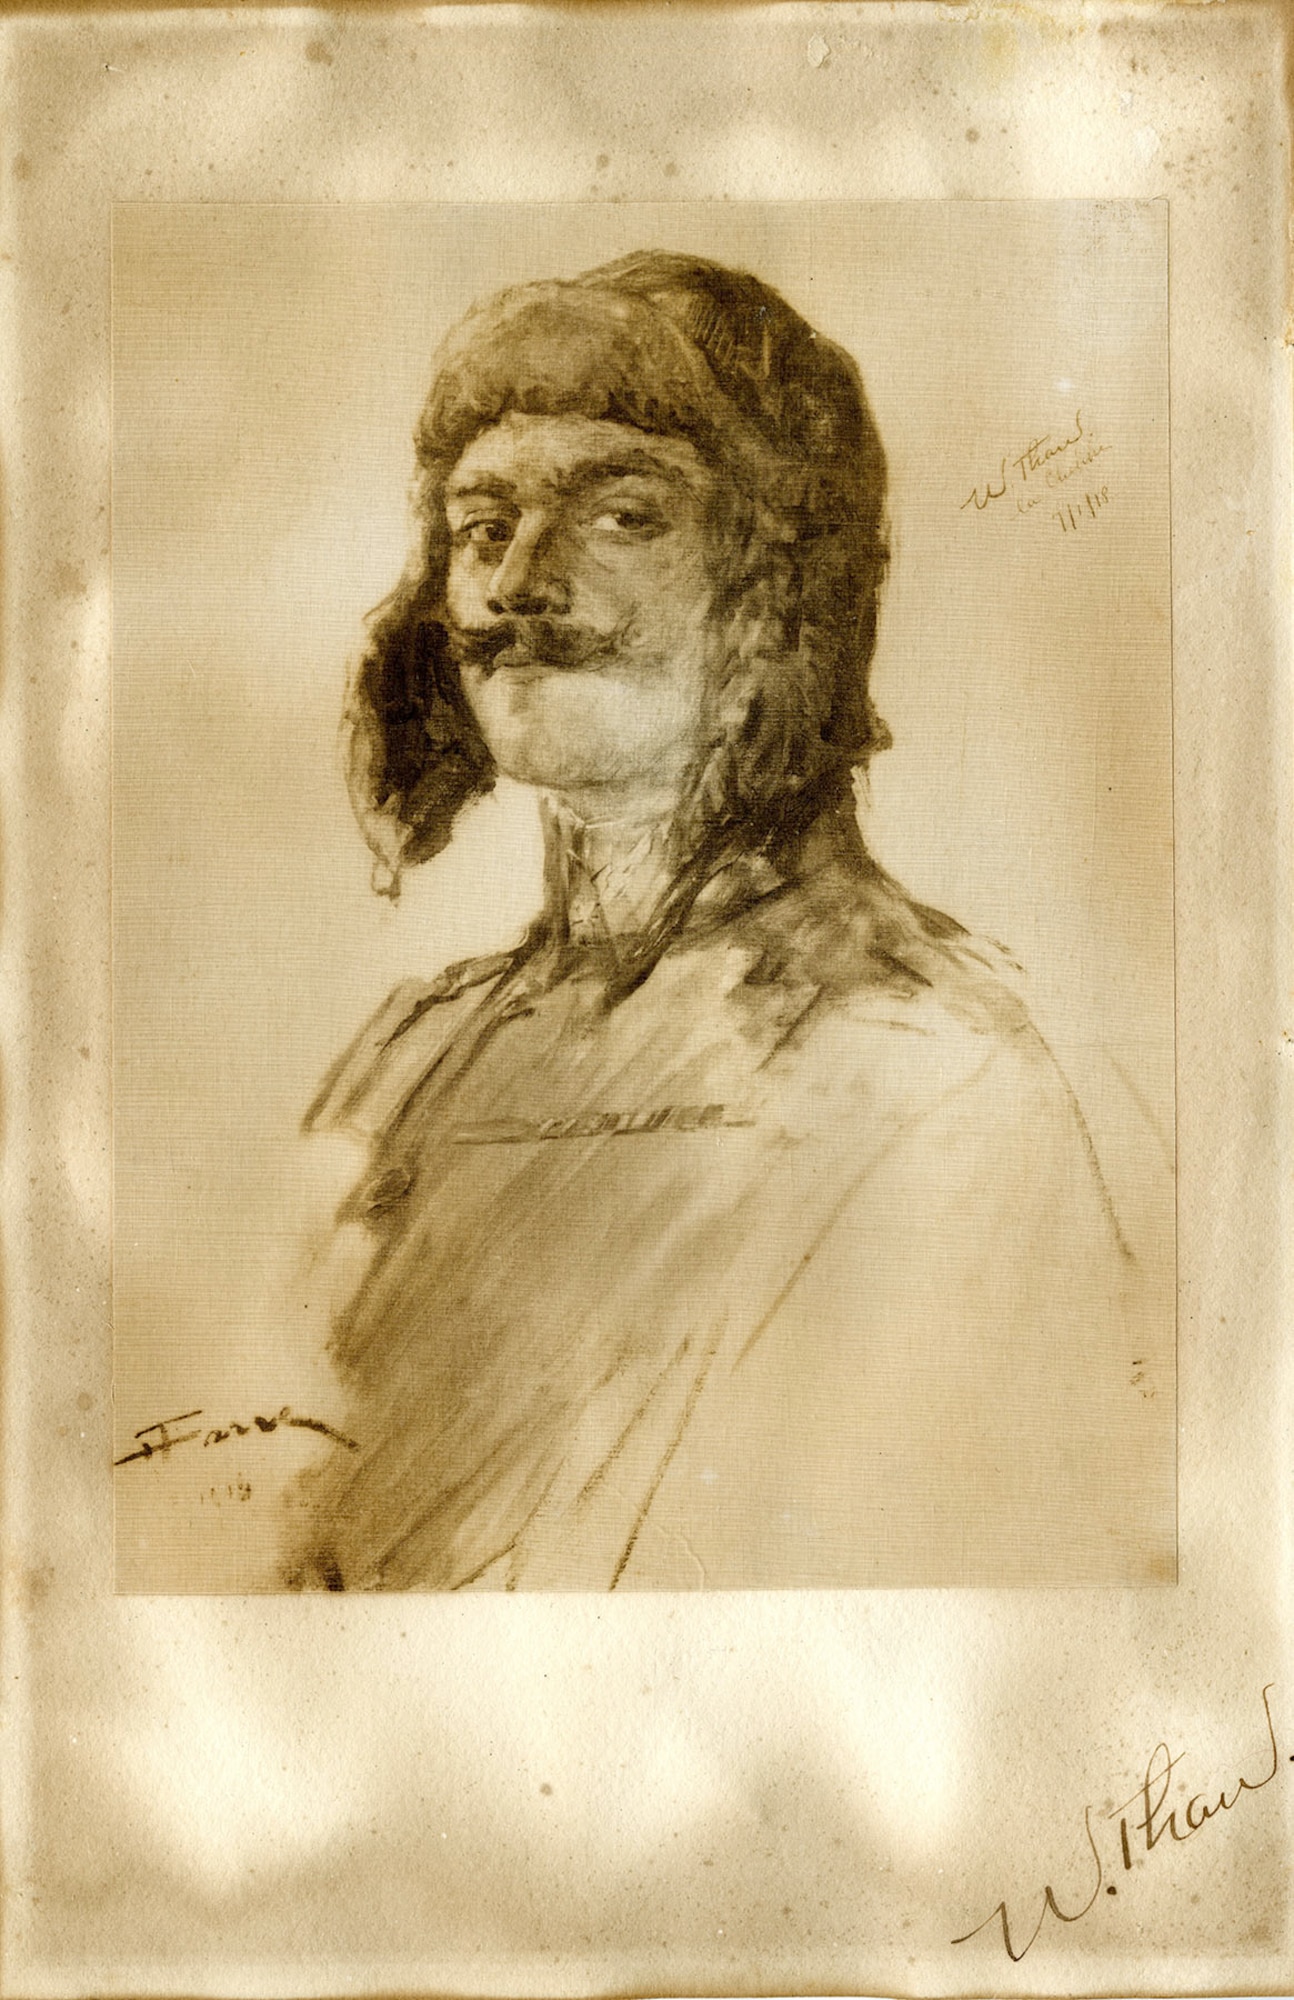 Lt. Col. William Thaw, pictured here in a pencil drawing by Henri Farré, was a World War I flying ace who flew with the Lafayette Escadrille. Flying a Nieuport, he scored his first victory in May 1916 and eventually achieved five confirmed and two unconfirmed aerial victories. Thaw was also responsible for the acquisition of the squadron's mascots, lion cubs Whiskey and Soda. (U.S. Air Force photo)